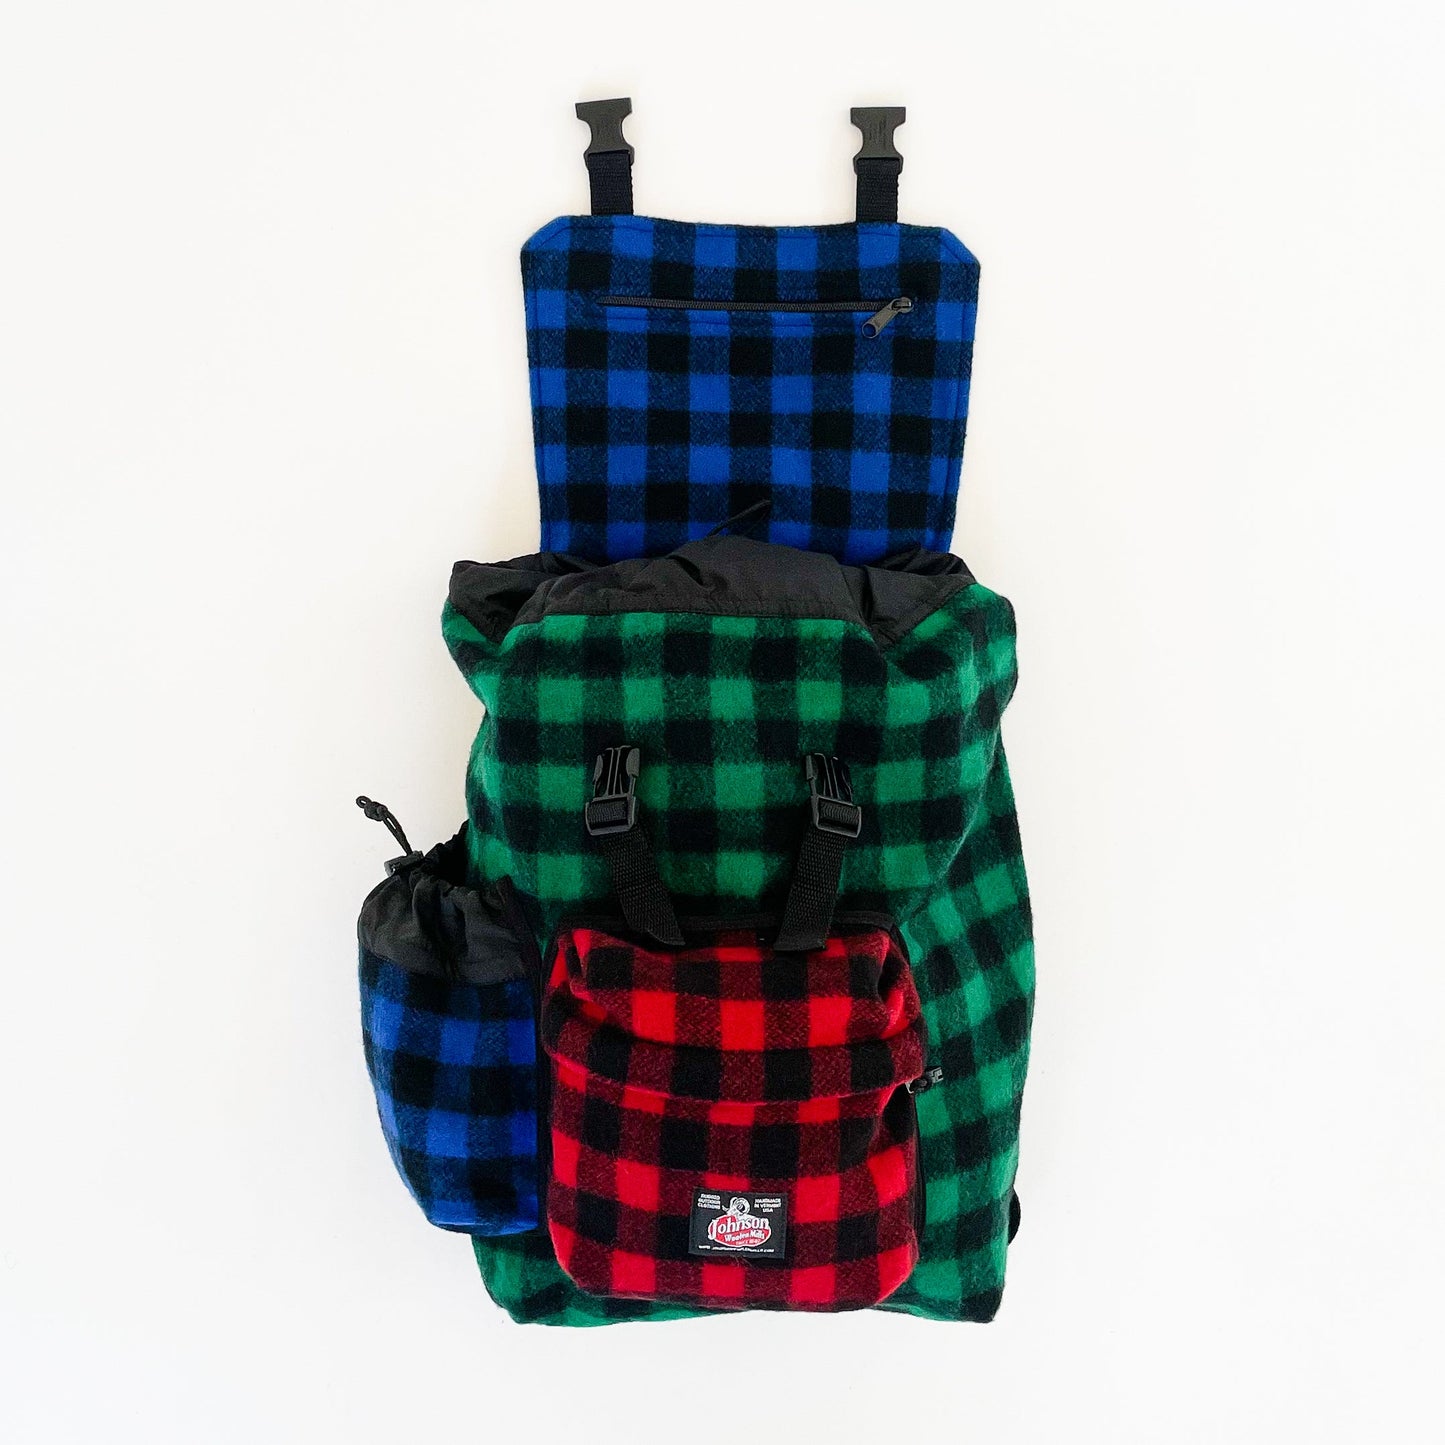 Wool back pack in multi color patchwork, with top flap open